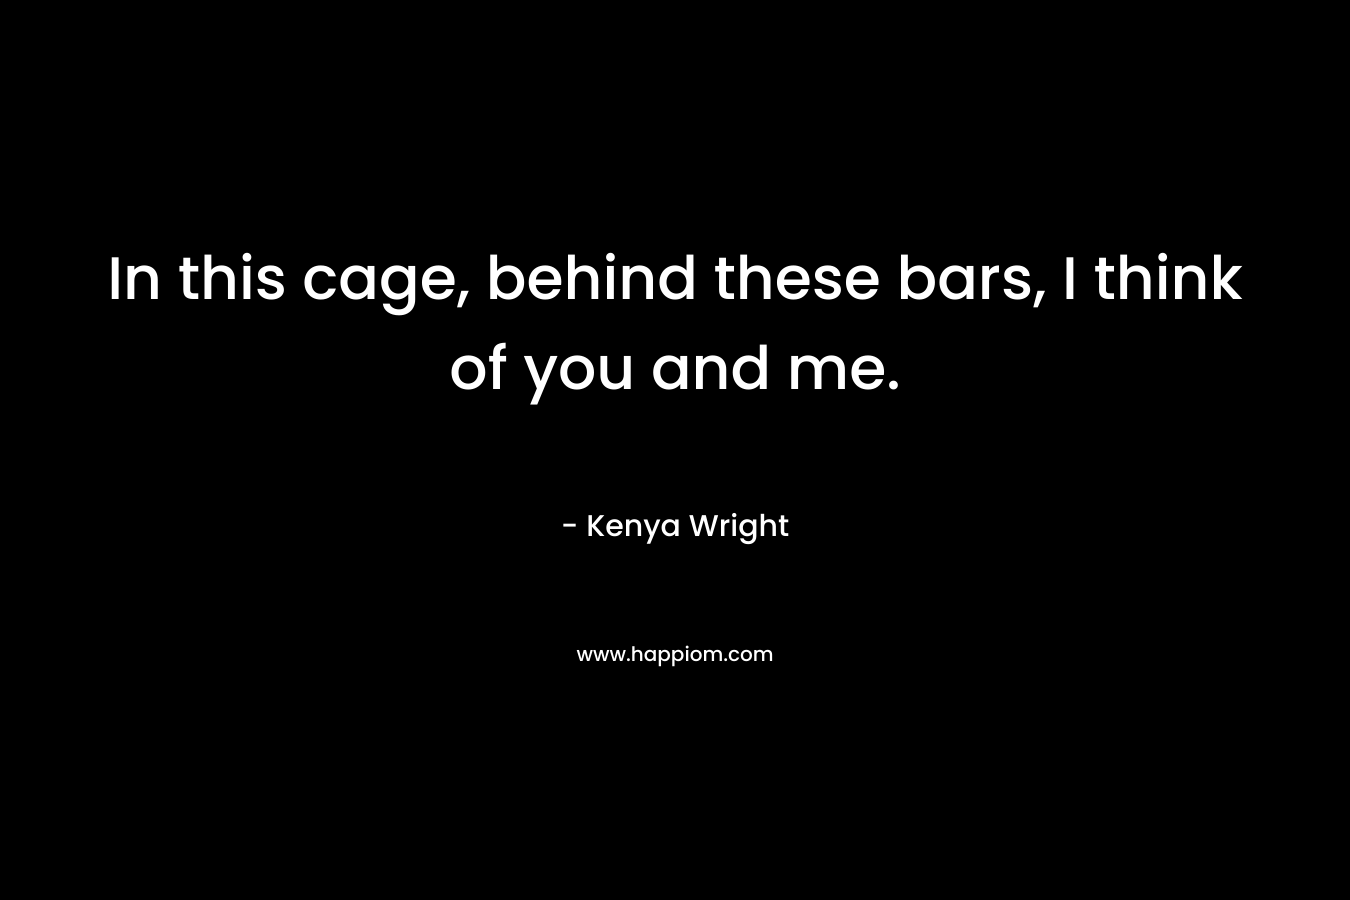 In this cage, behind these bars, I think of you and me. – Kenya Wright